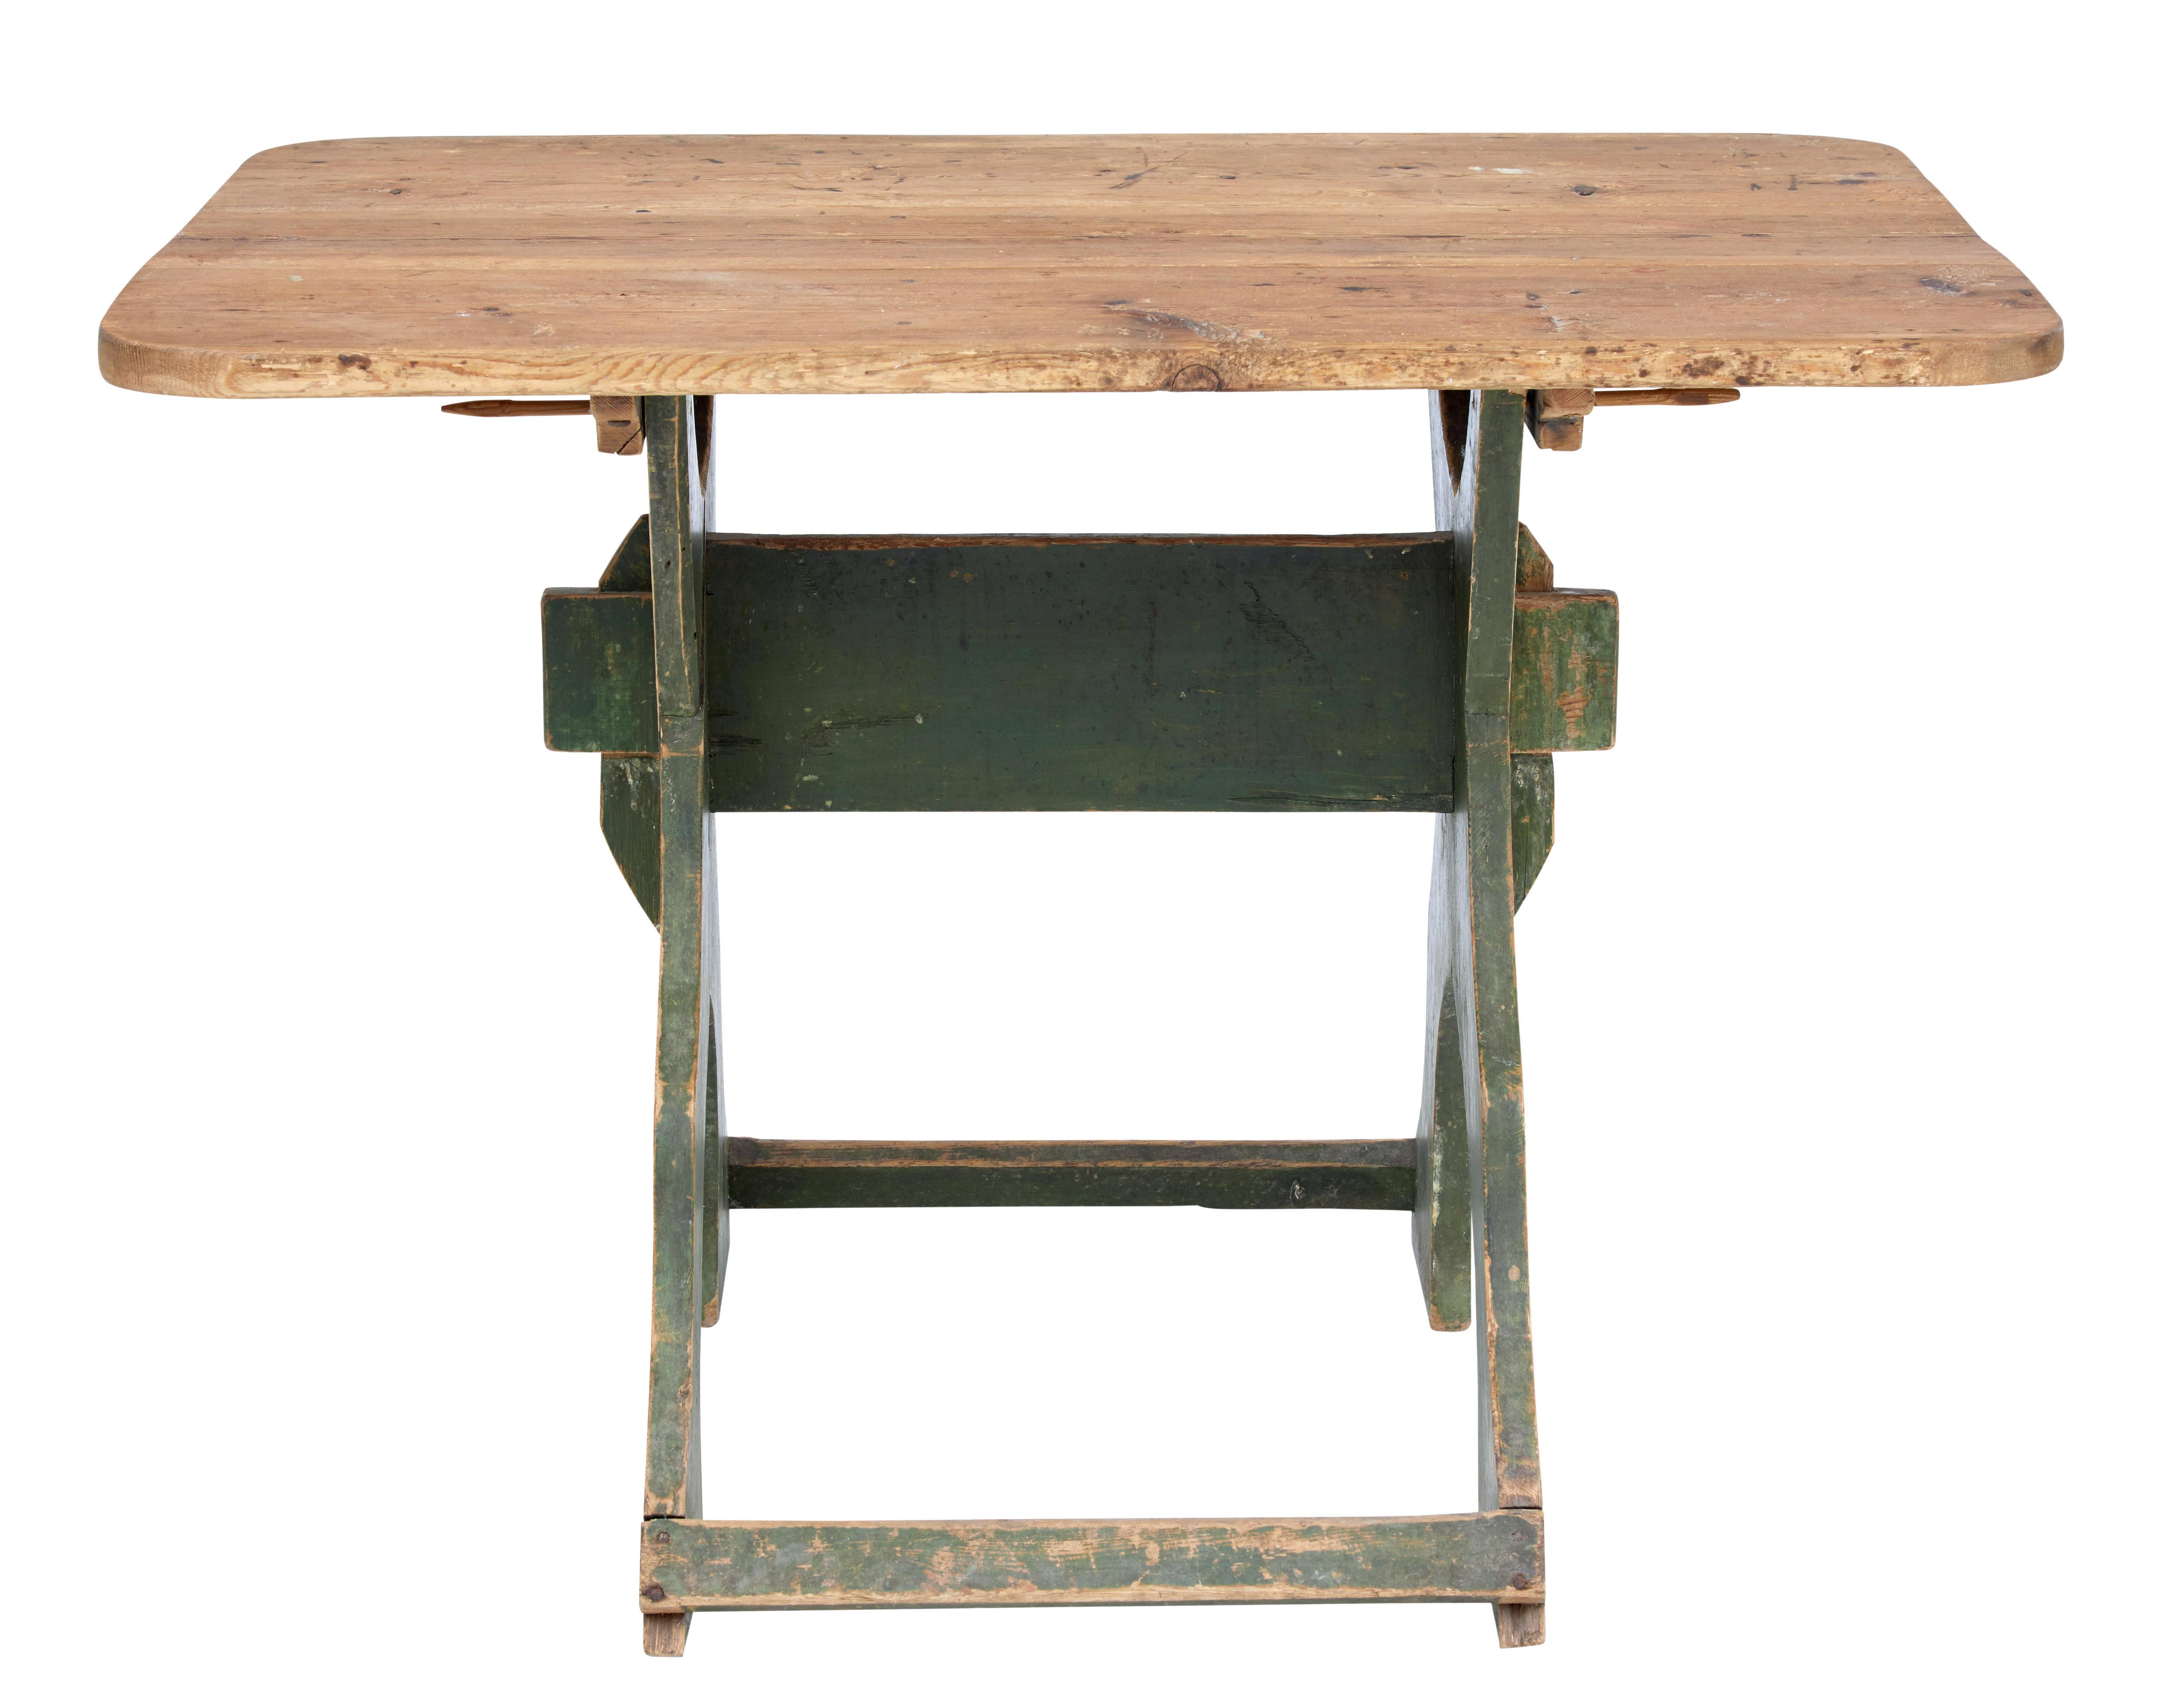 Unusual rustic Swedish pine table, circa 1880.

3 plank removable top with rounded corners. Stands on a shaped X-frame base with original paint, held in place by stretcher and pegs.

Ideal for use as a side, centre or small kitchen